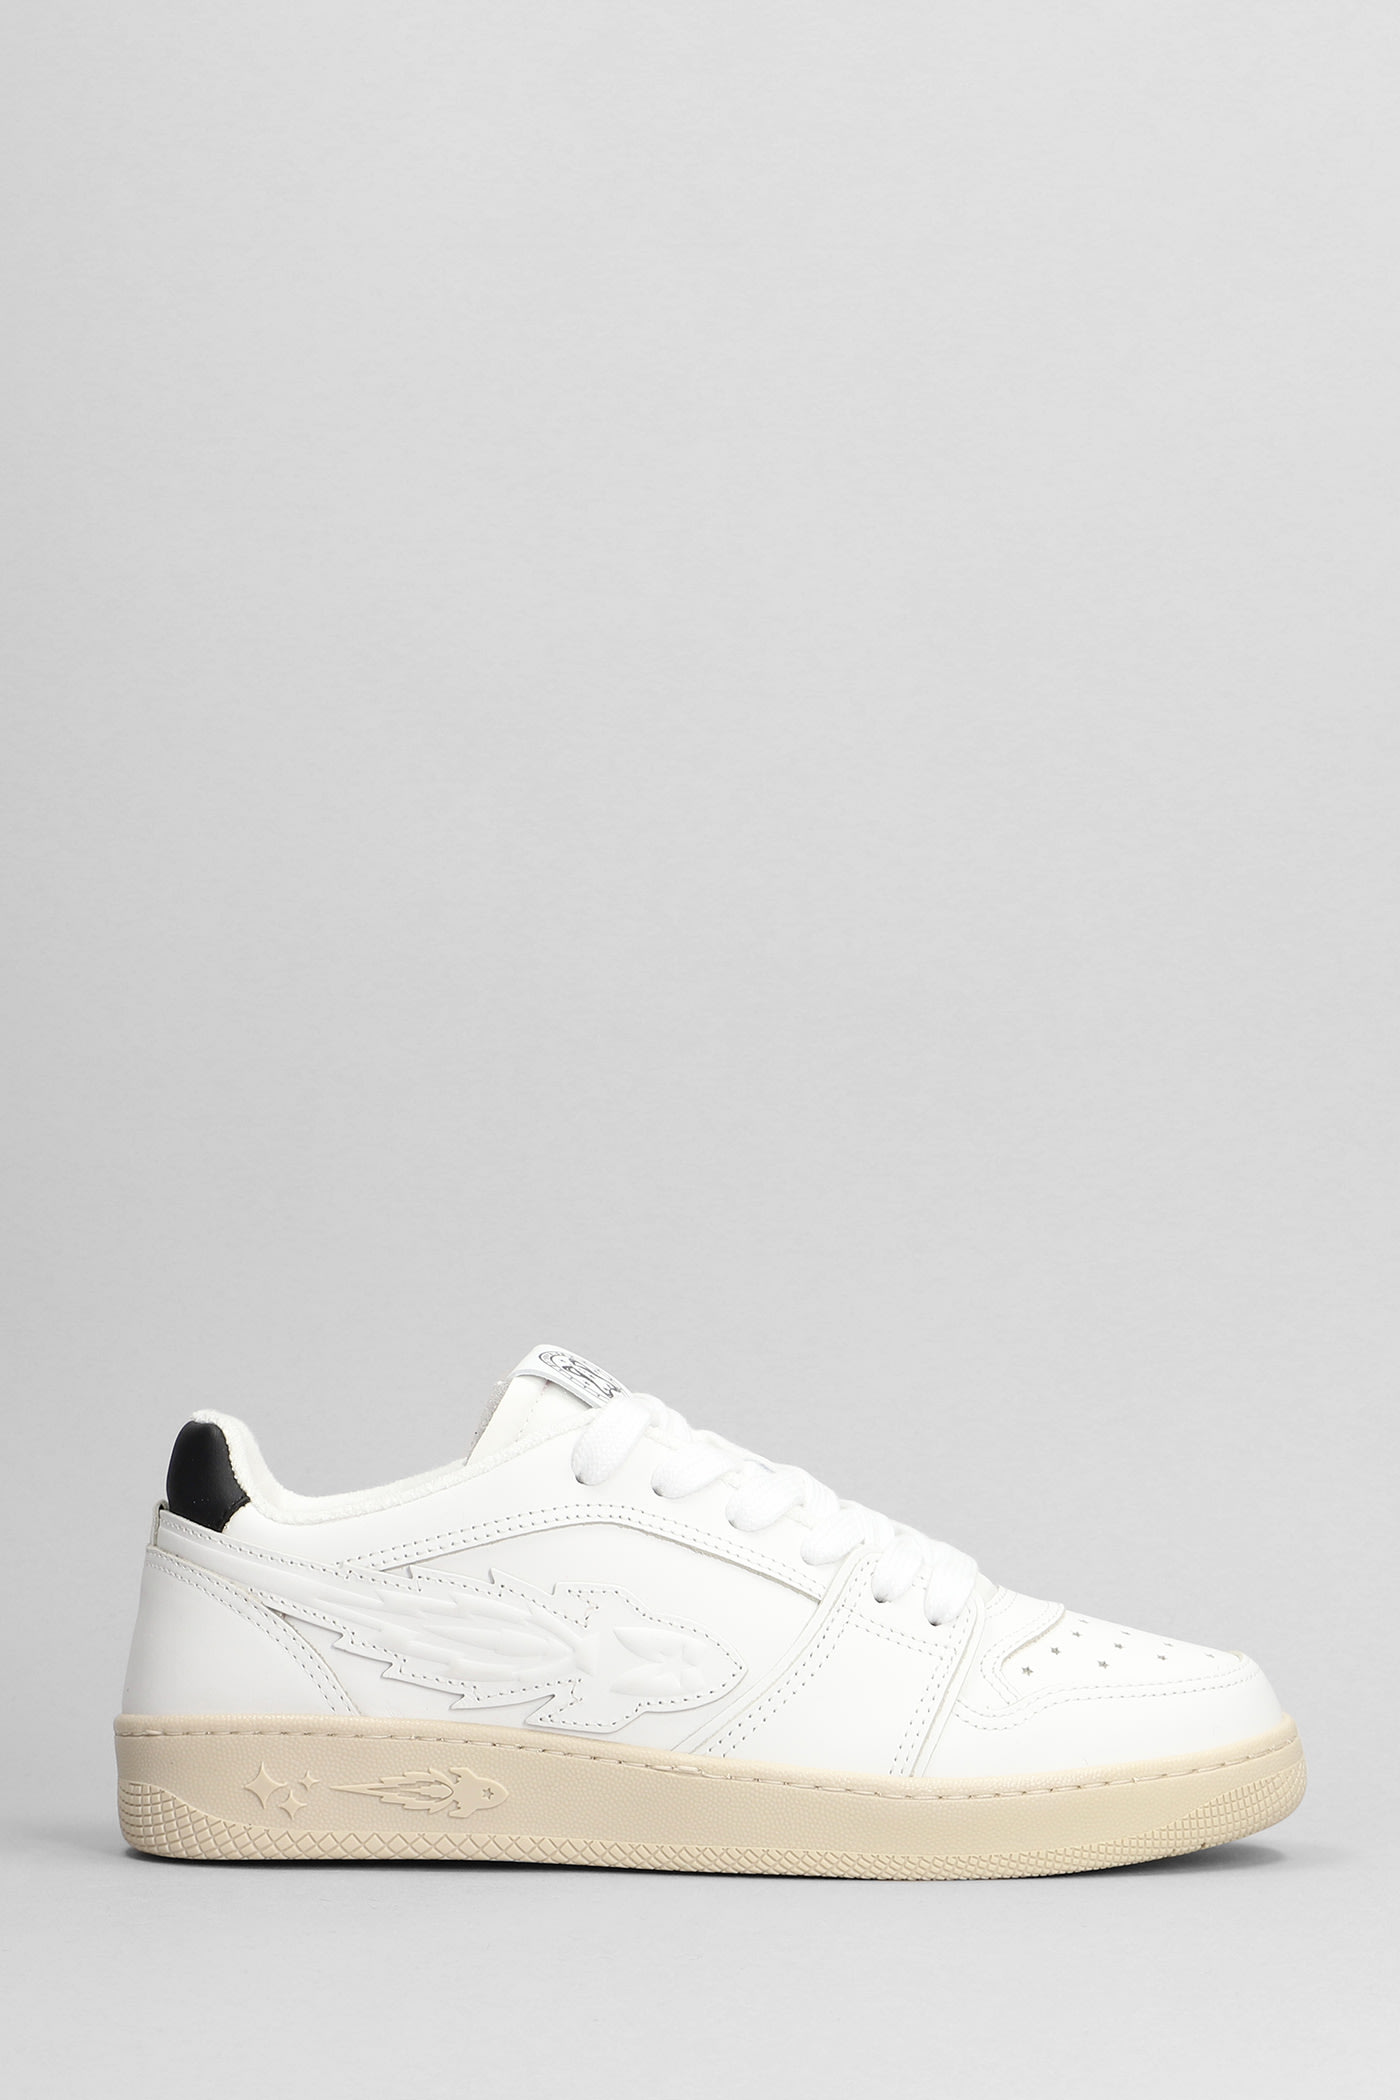 Enterprise Japan Trainers In White Leather